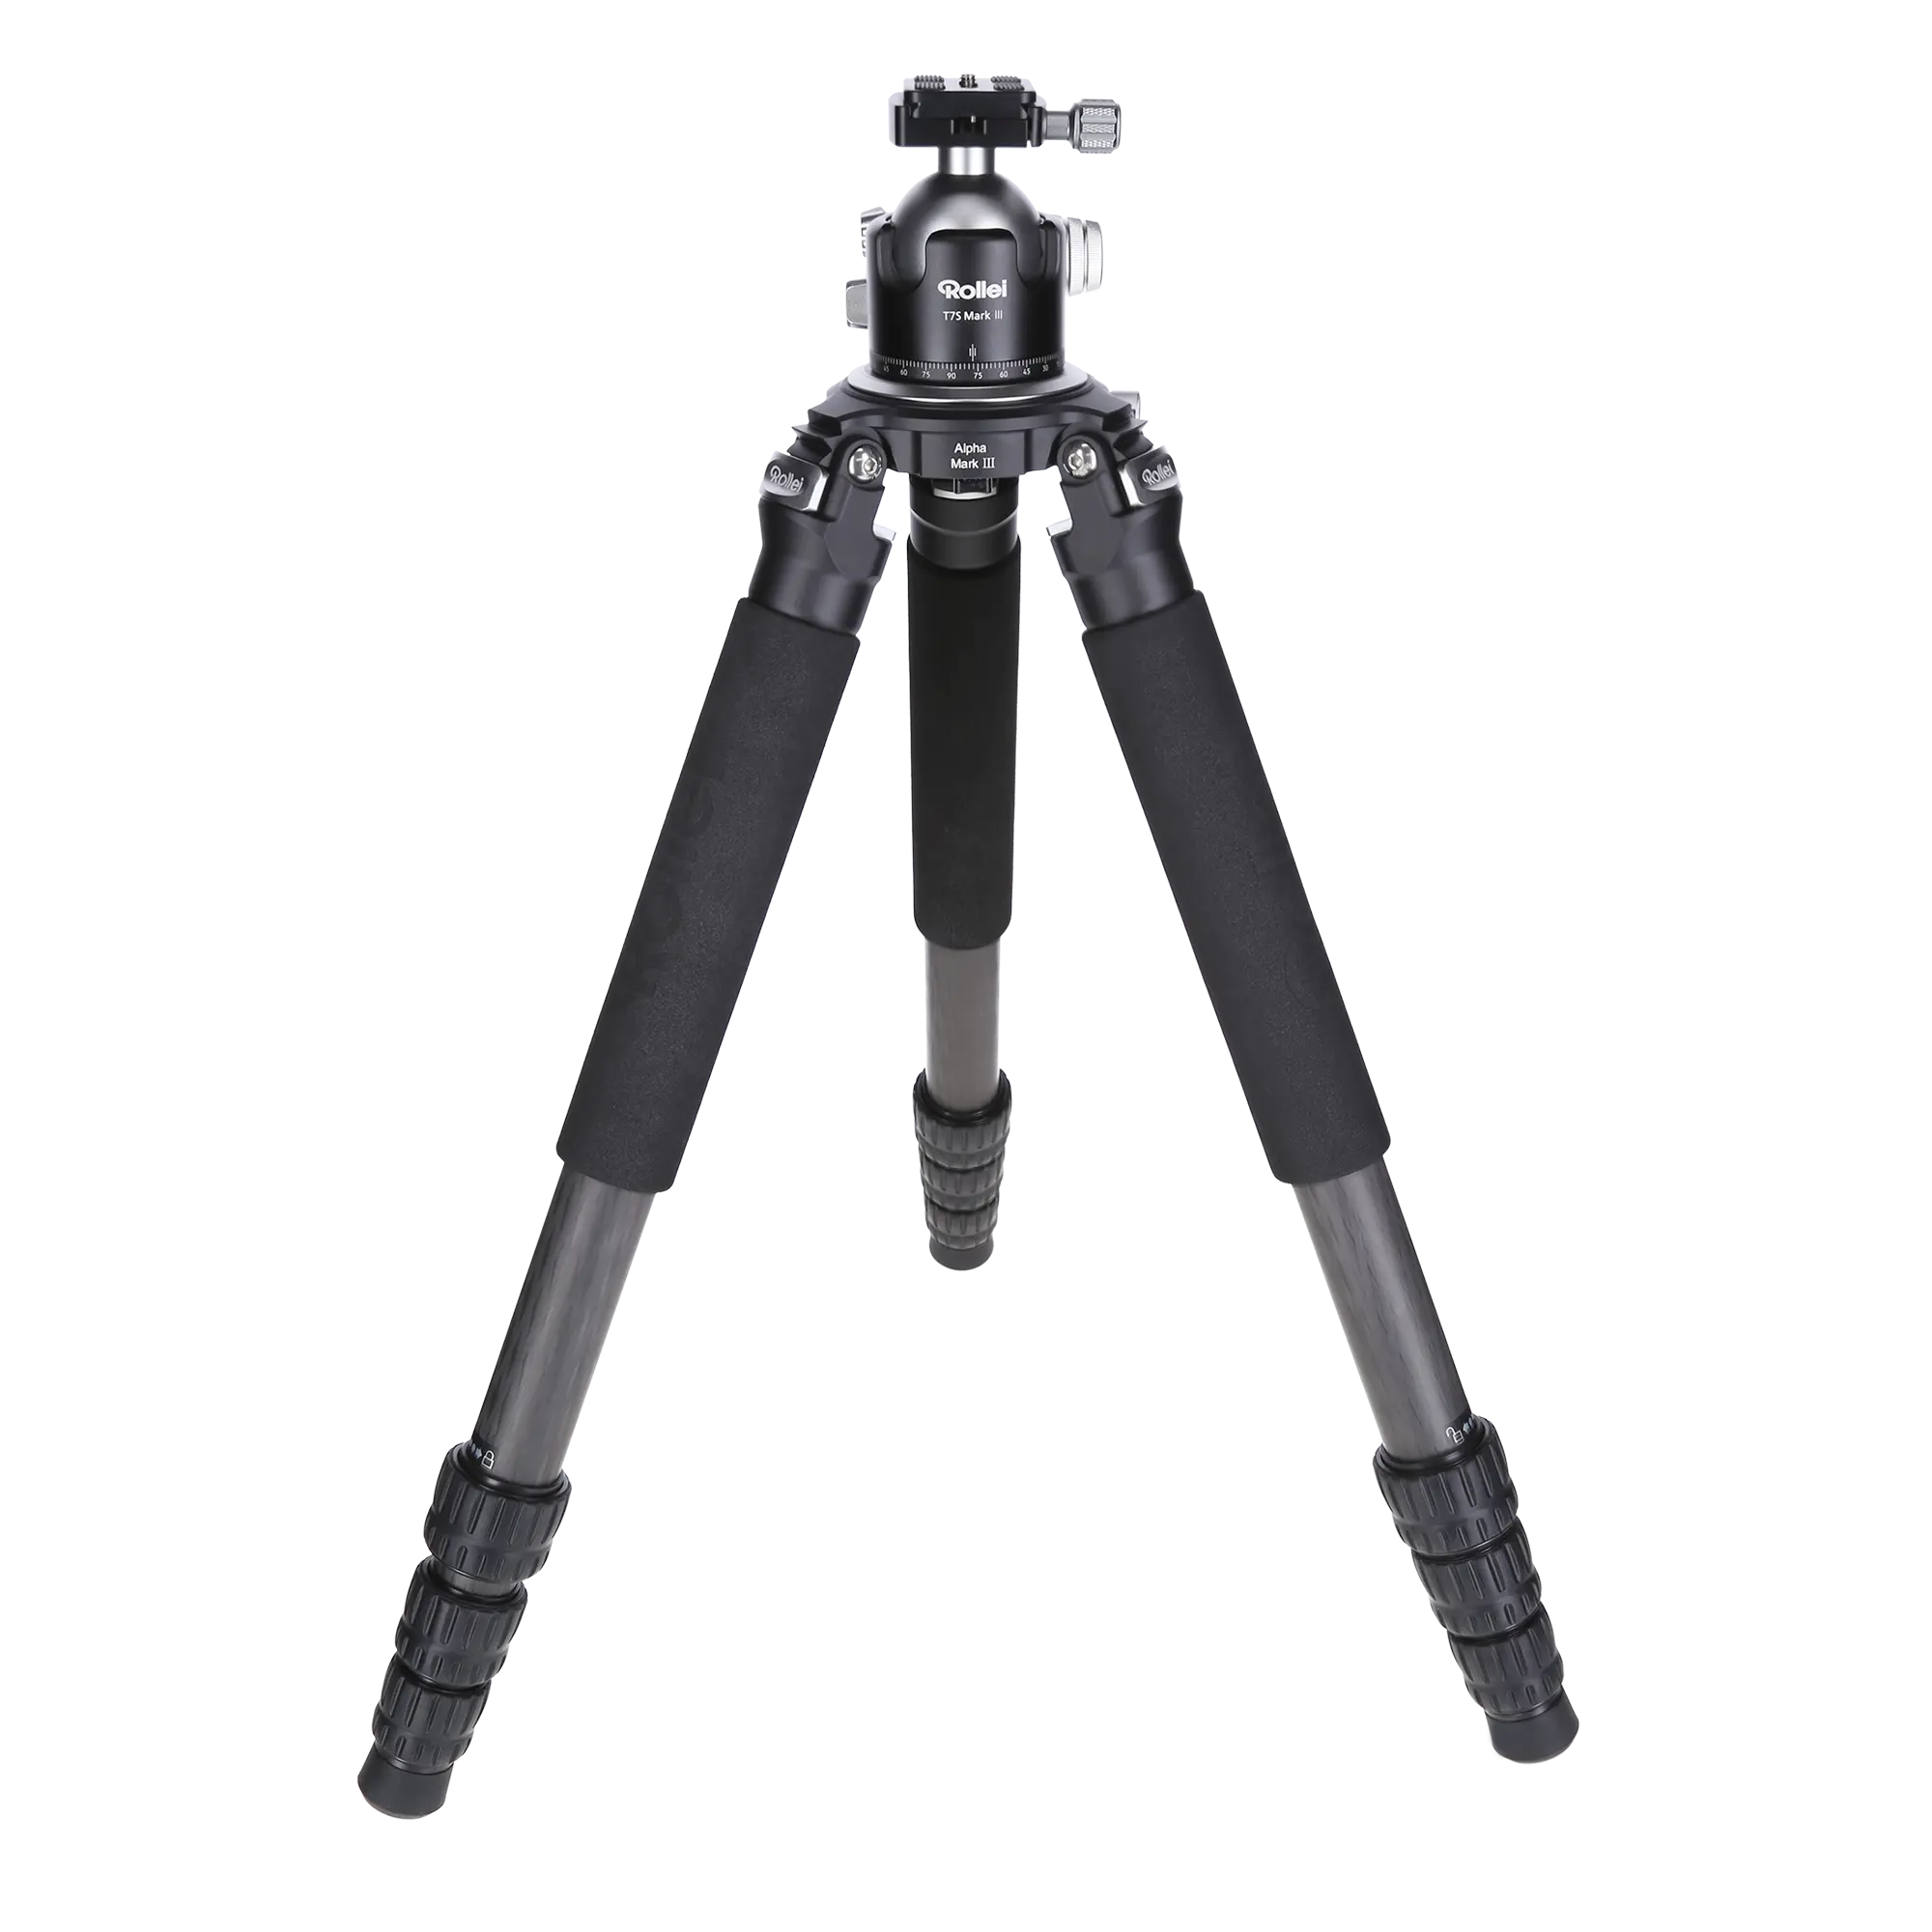 Tripods of the Rock Solid Series by Rollei – Rollei